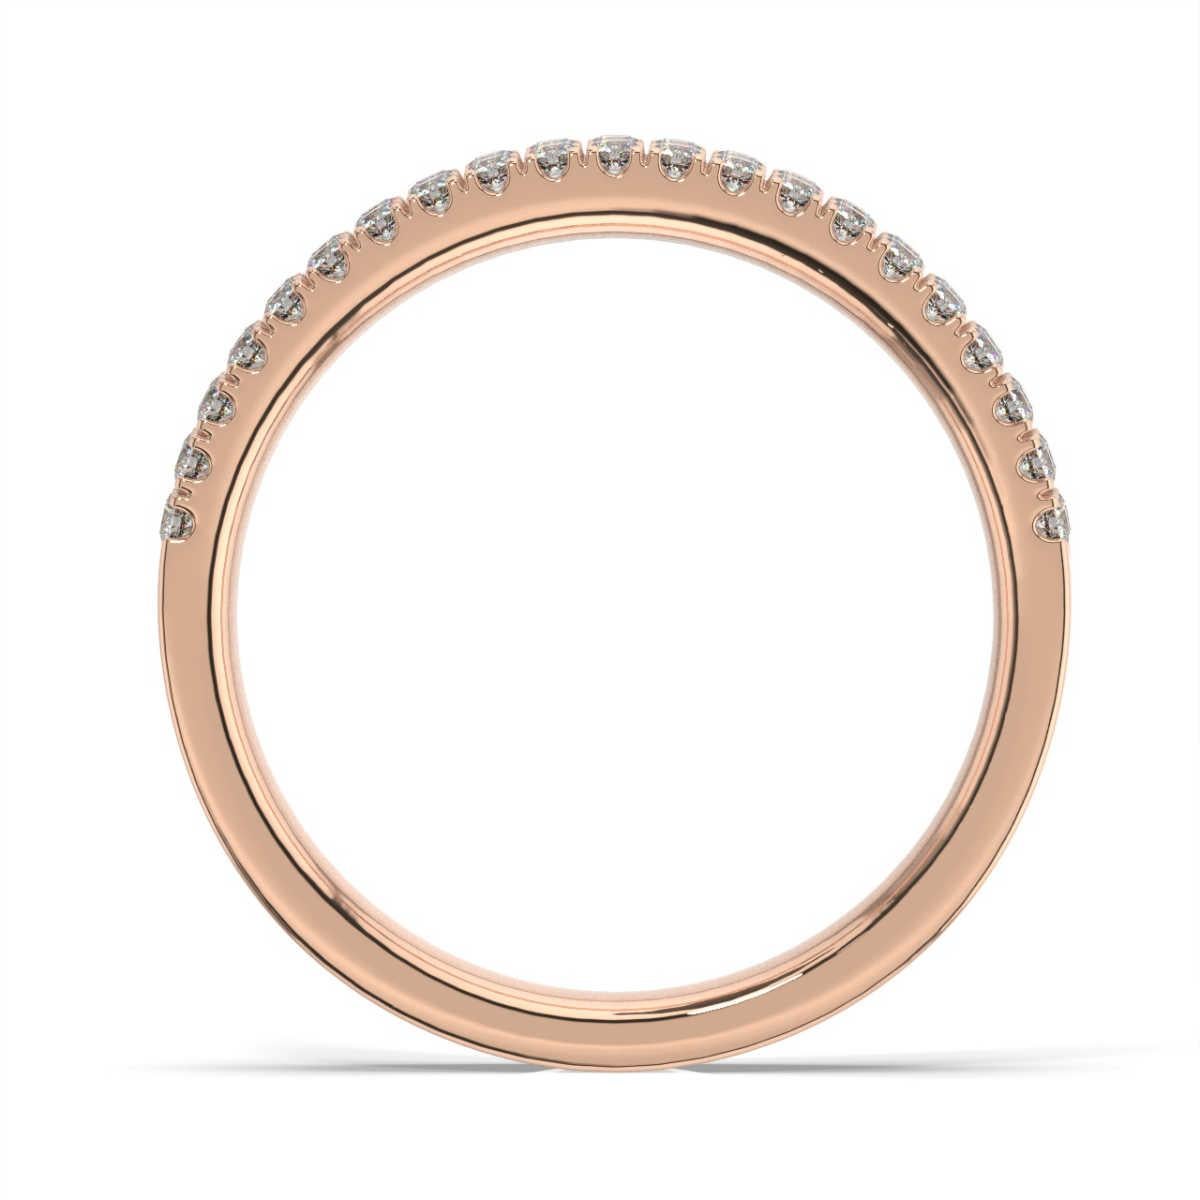 This band features two rows of Micro- Prong-set round brilliant diamonds. Experience the difference

Product details: 

Center Gemstone Color: WHITE
Side Gemstone Type: NATURAL DIAMOND
Side Gemstone Shape: ROUND
Metal: 14K Rose Gold
Metal Weight: